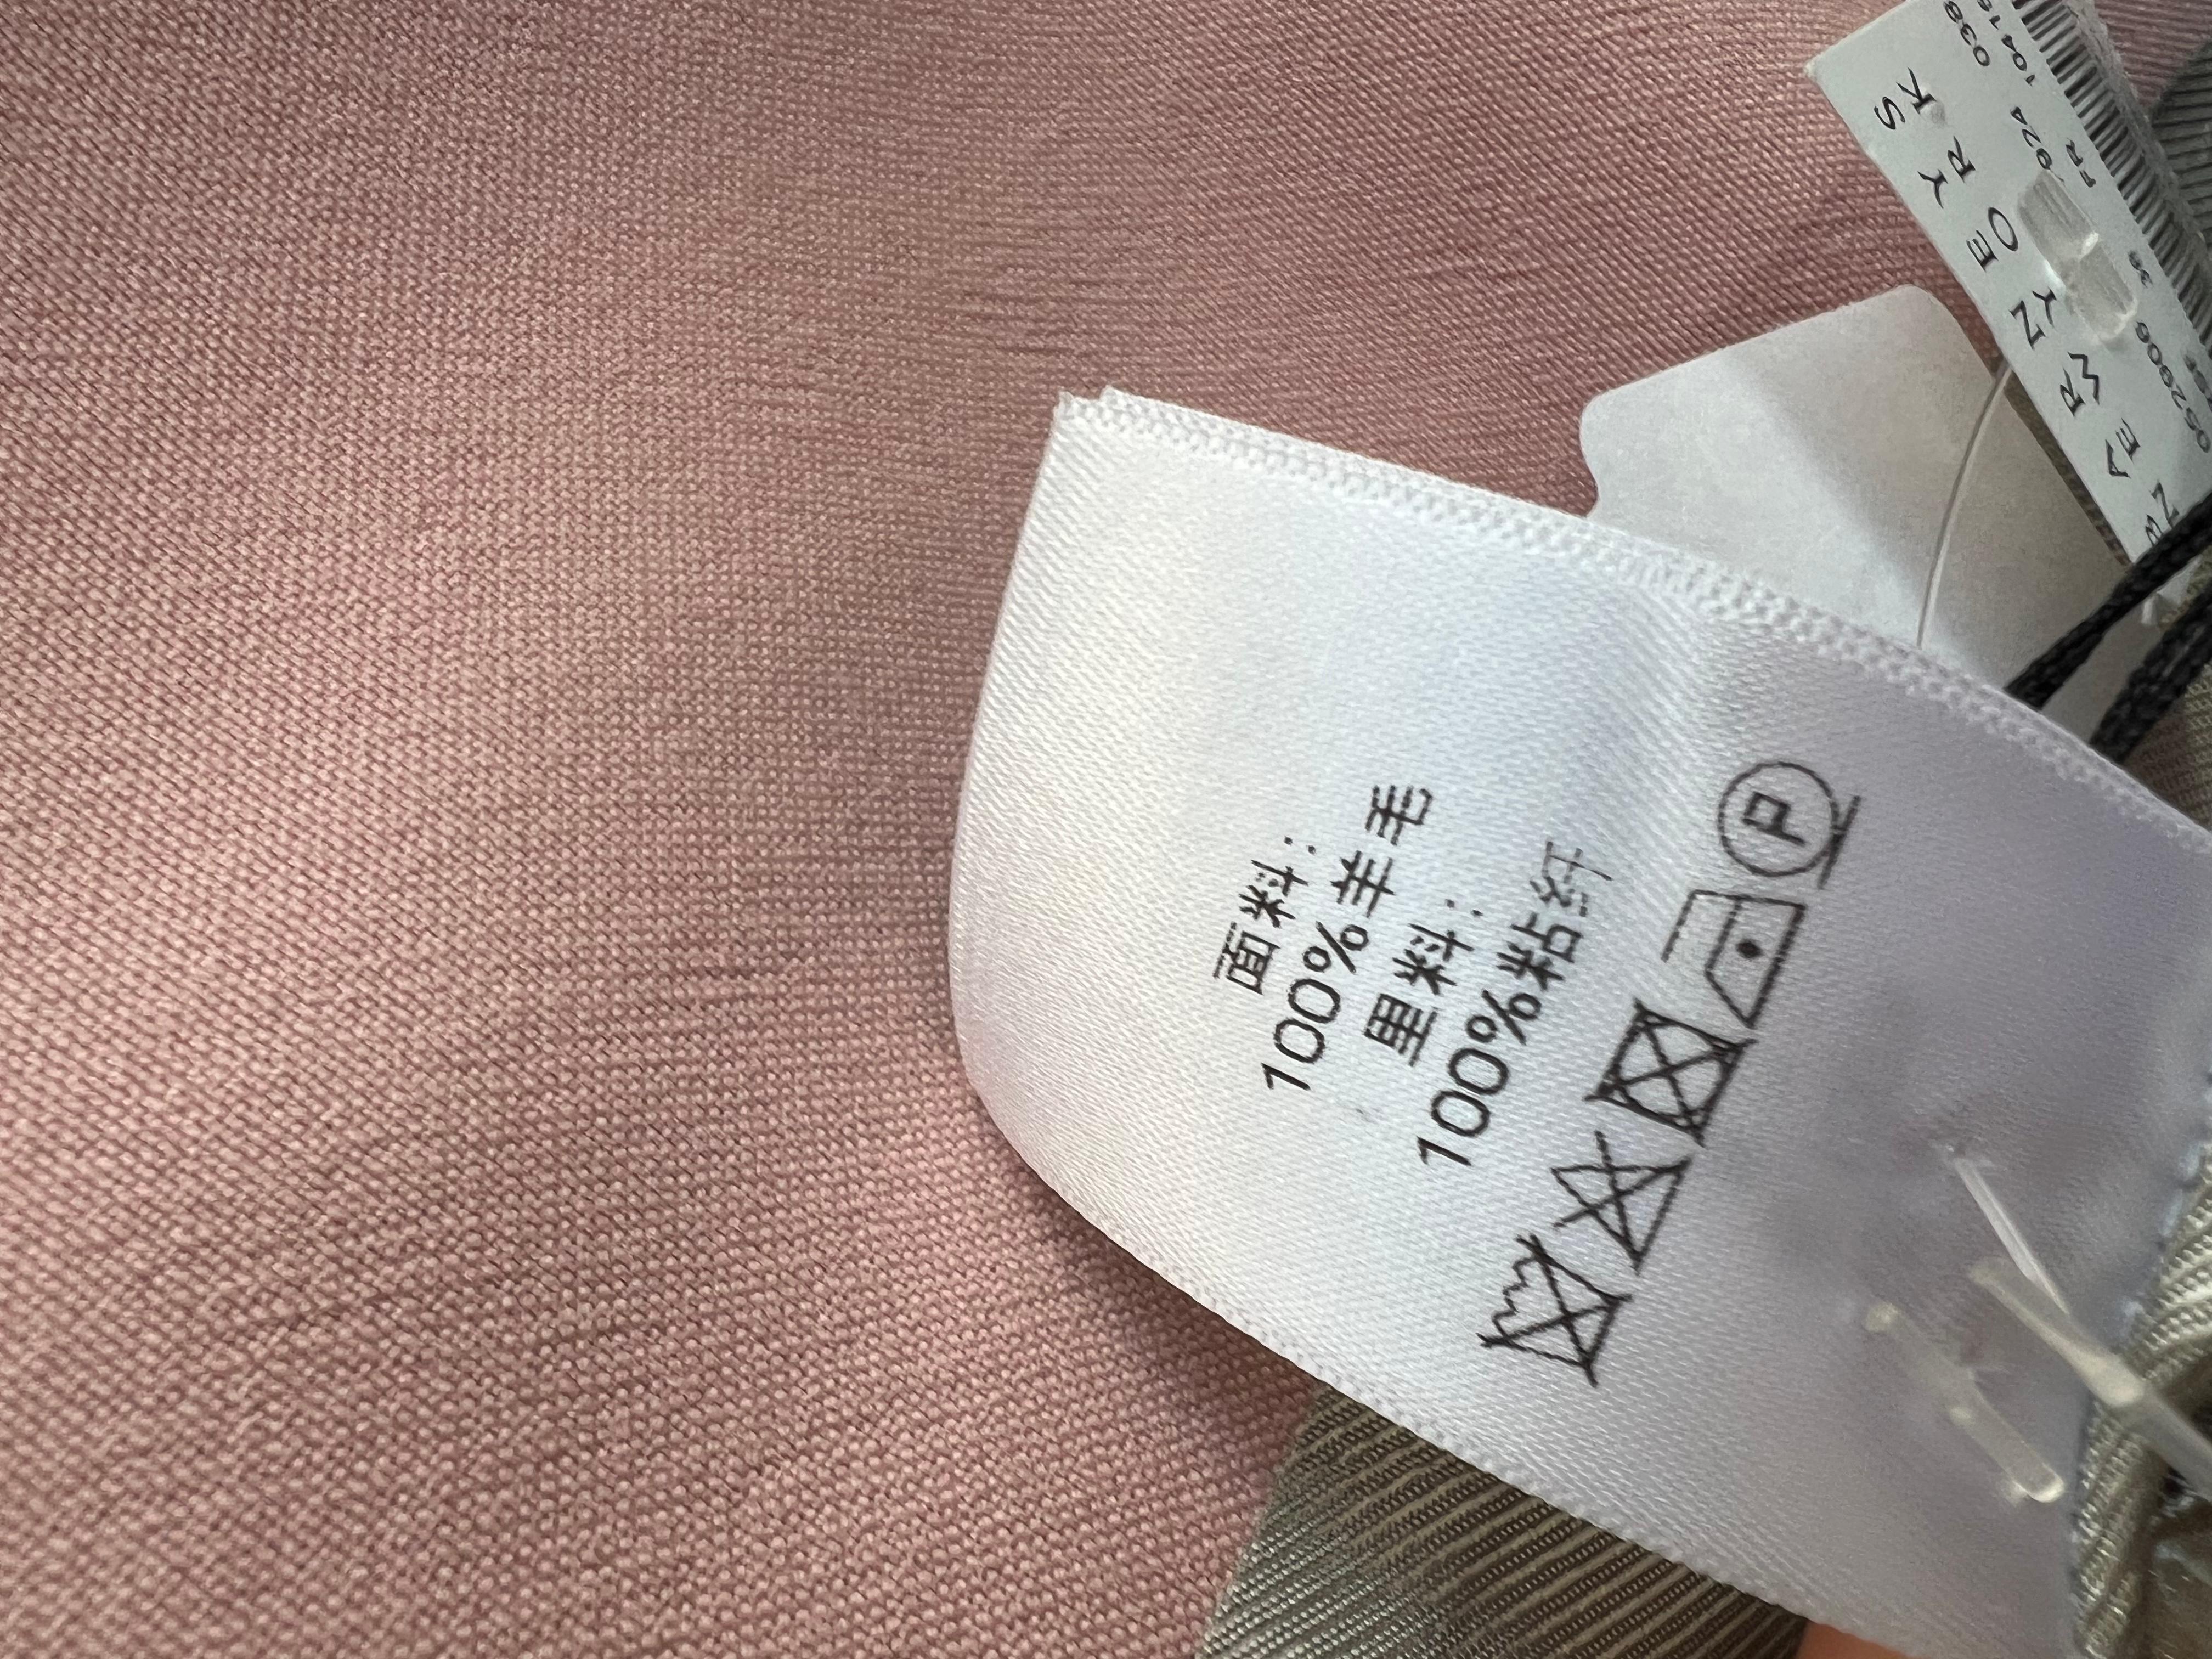 Celine SS18 Phoebe Philo Pink Belted Blazer In New Condition For Sale In Toronto, CA